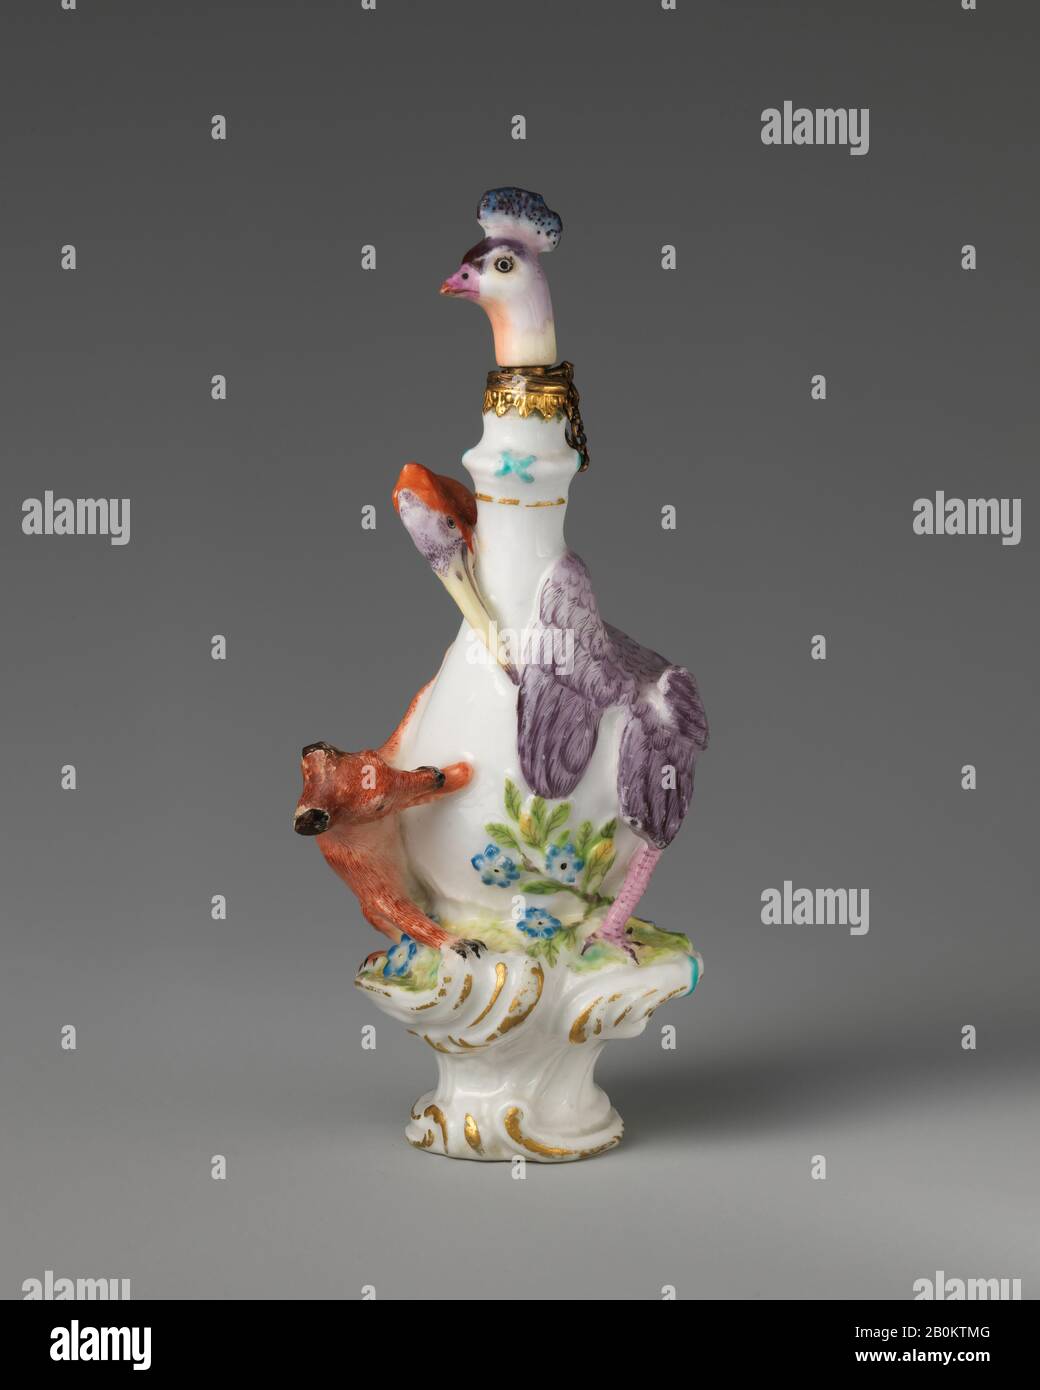 Chelsea Porcelain Manufactory, Fox and stork in a group, British, Chelsea, Chelsea Porcelain Manufactory (British, 1745–1784, Red Anchor Period, ca. 1753–58), 1753–58, British, Chelsea, Soft-paste porcelain, 4 5/16 × 2 in. (11 × 5.1 cm), Ceramics-Porcelain Stock Photo